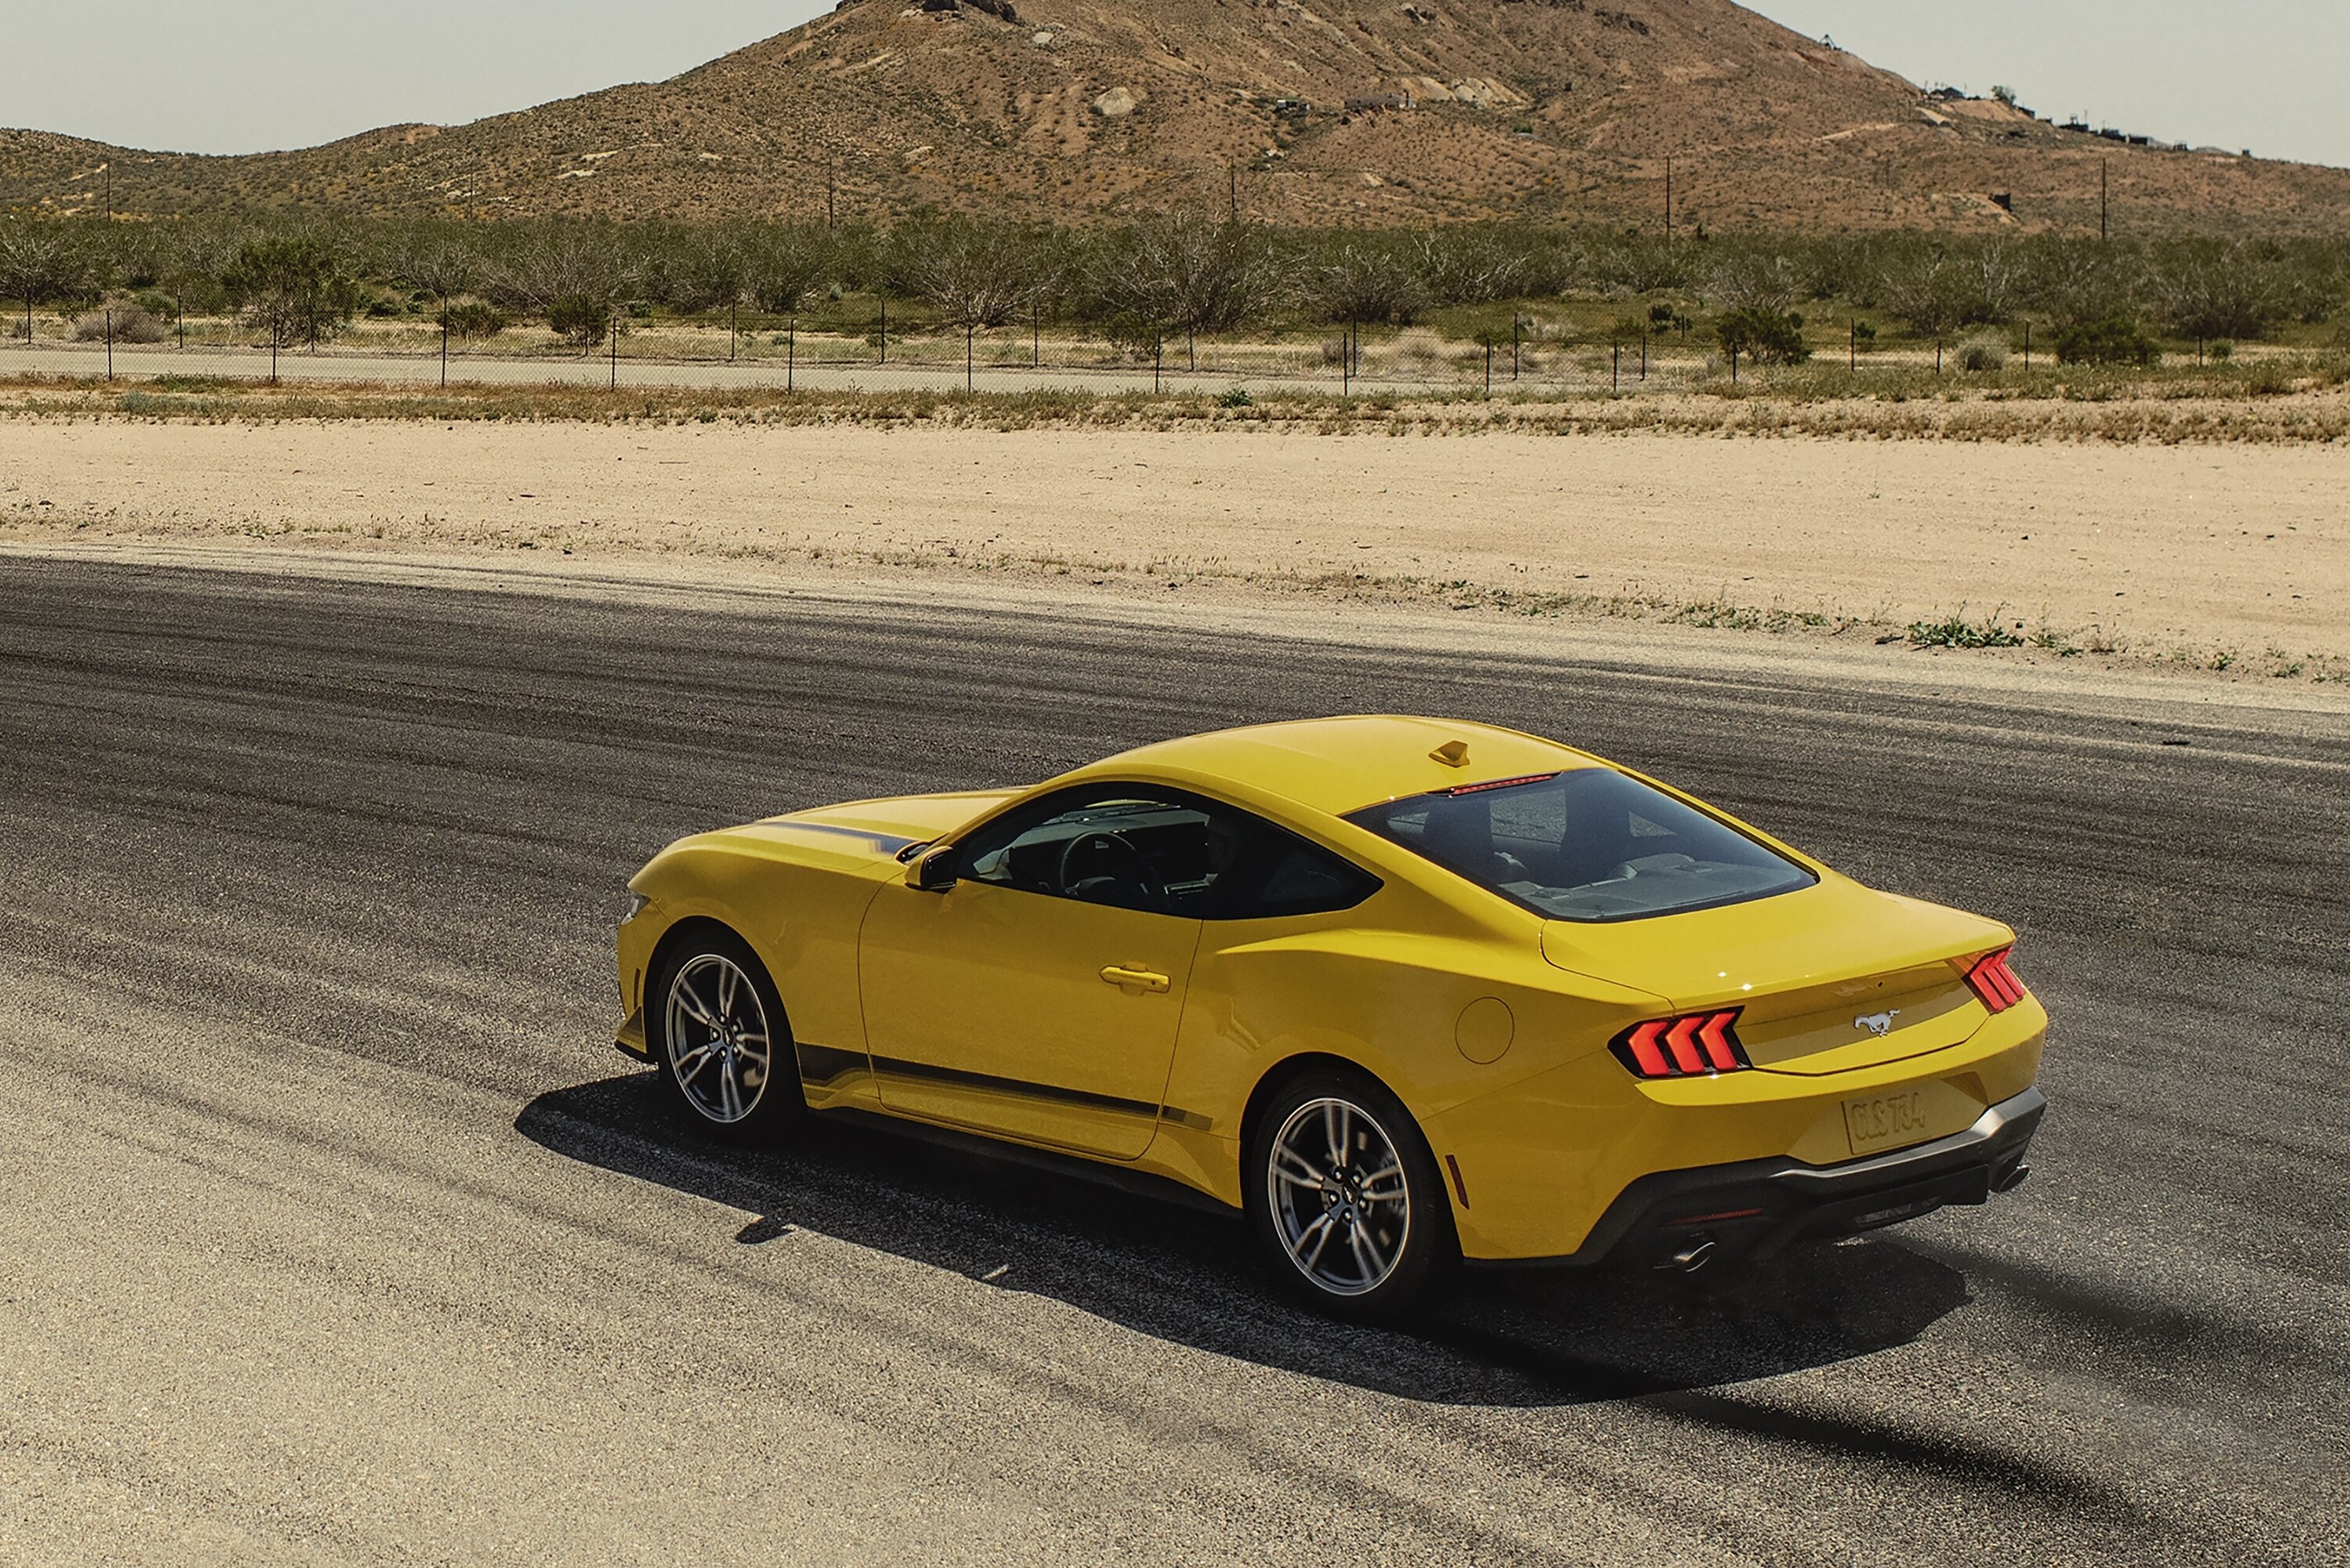 S650 Mustang Official YELLOW SPLASH Mustang S650 Thread 24_FRD_MST_61005